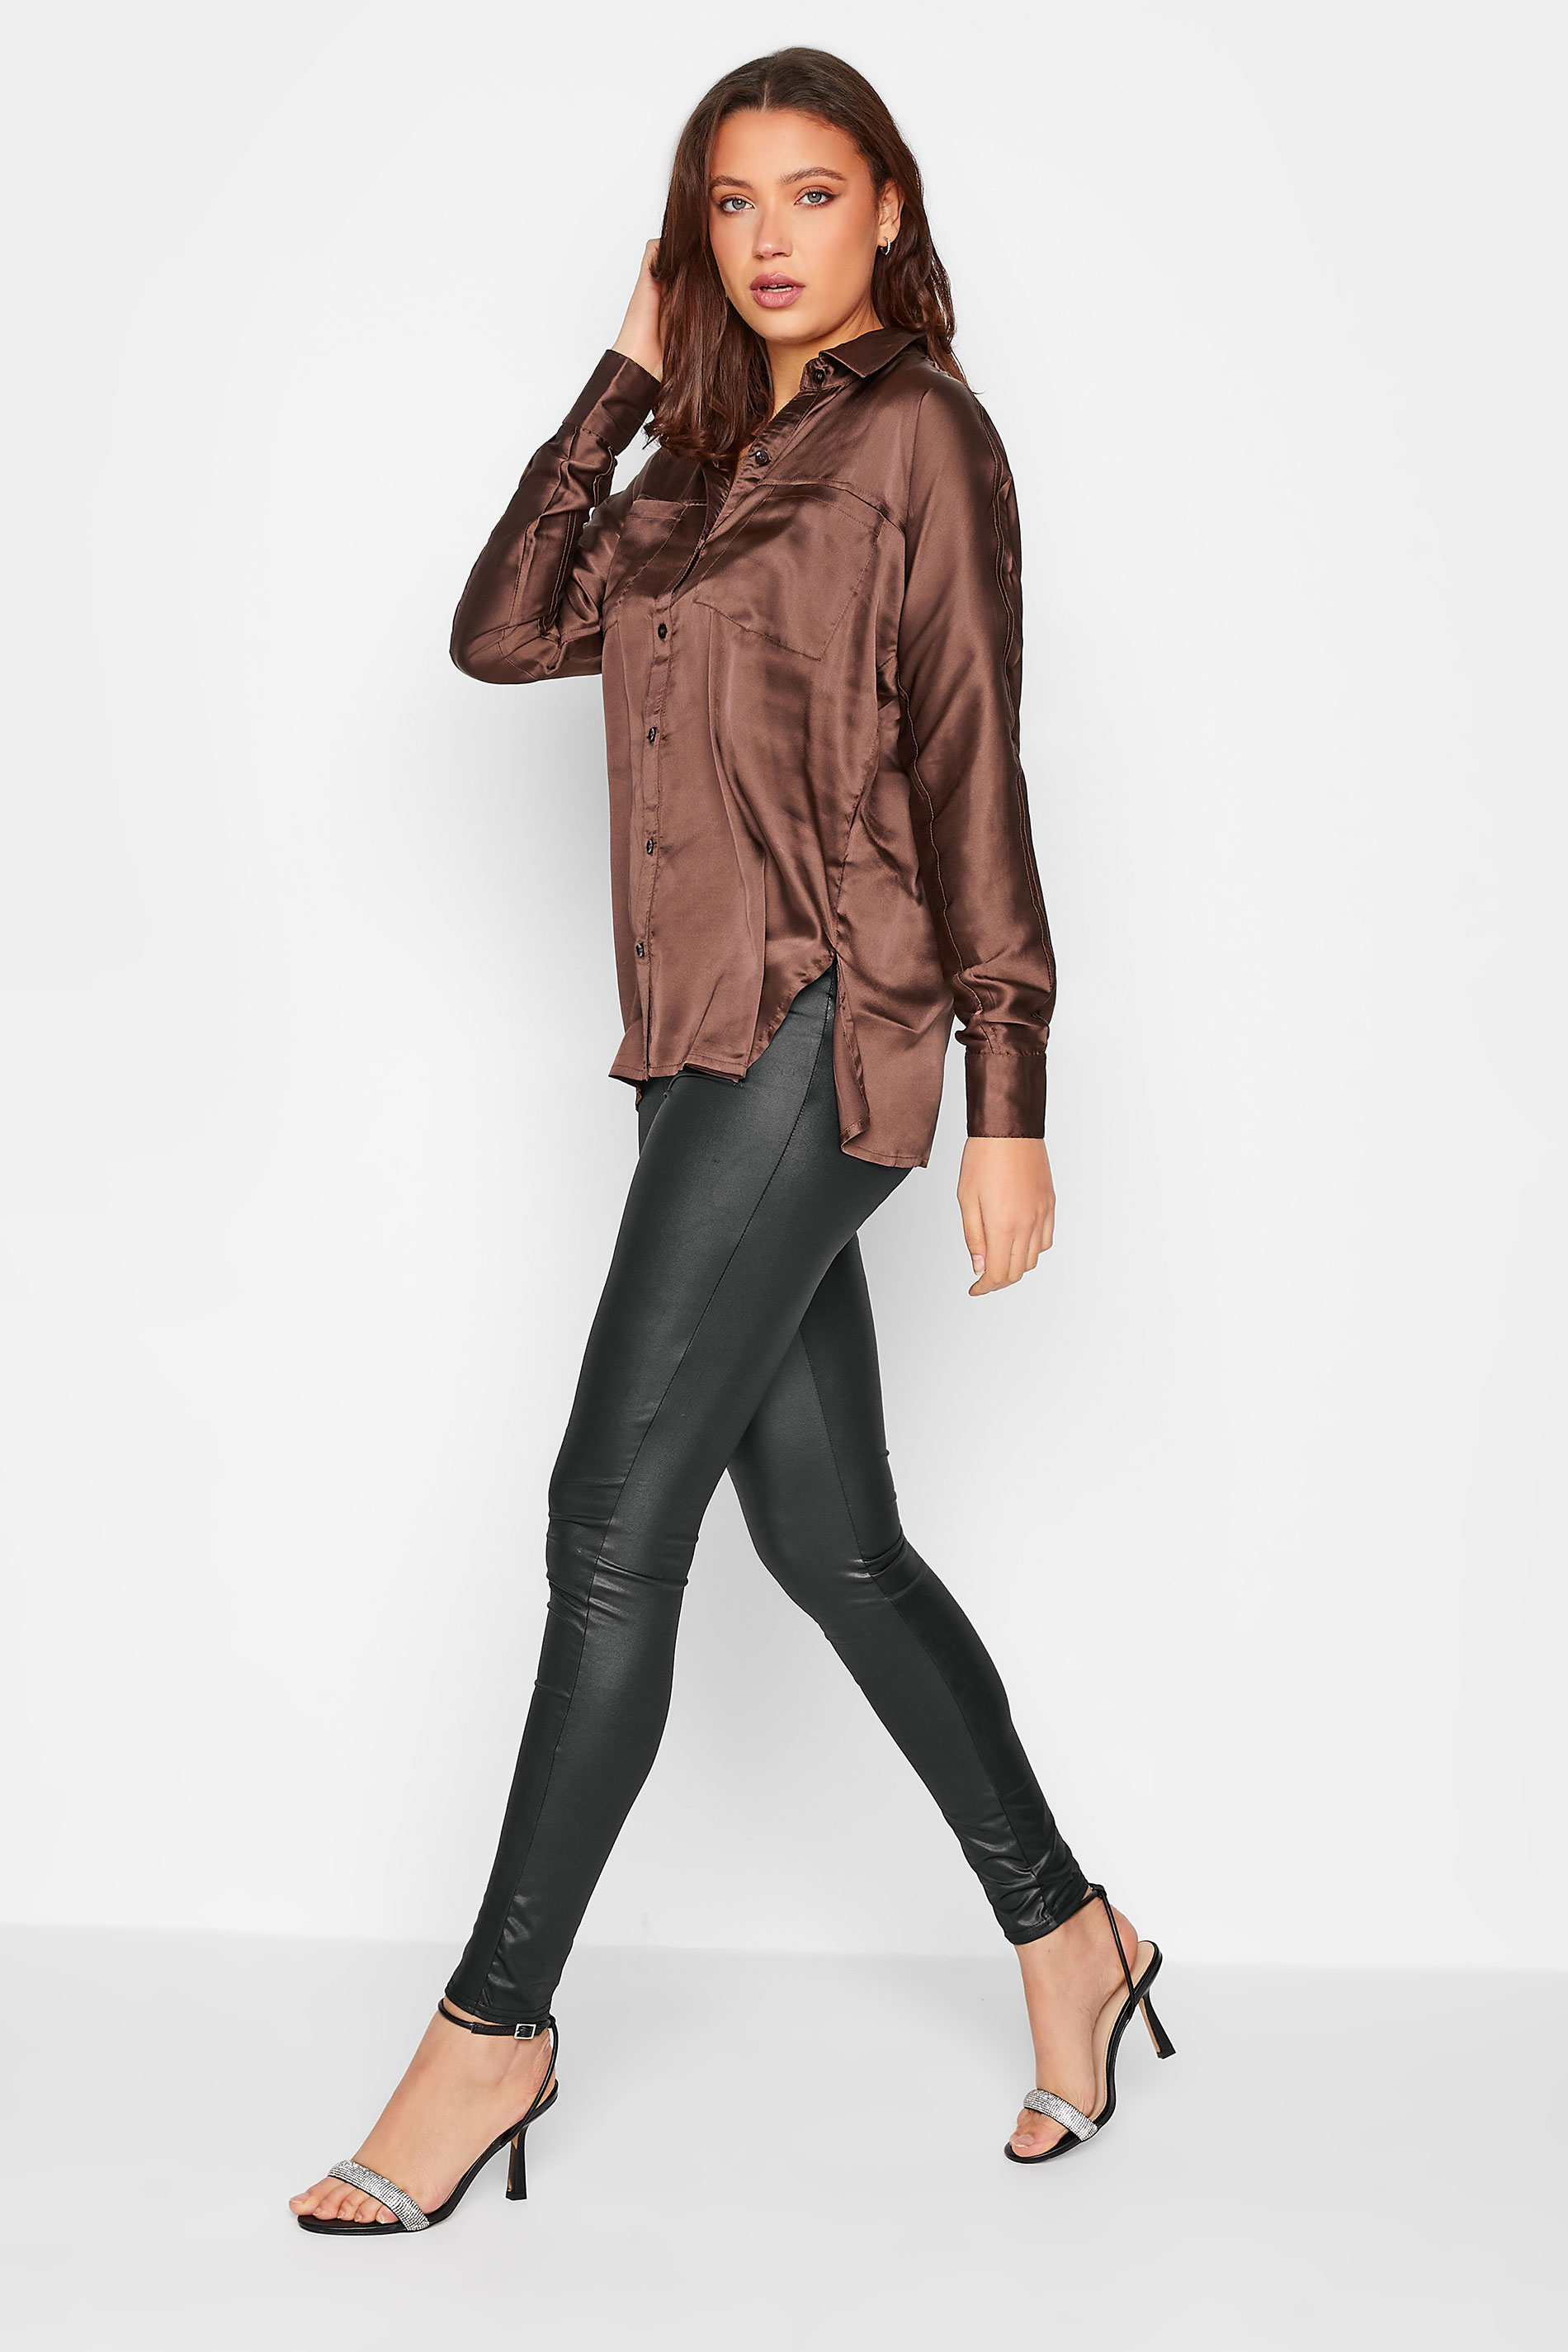 Tall Women's LTS Black Faux Leather Look Leggings | Long Tall Sally 2